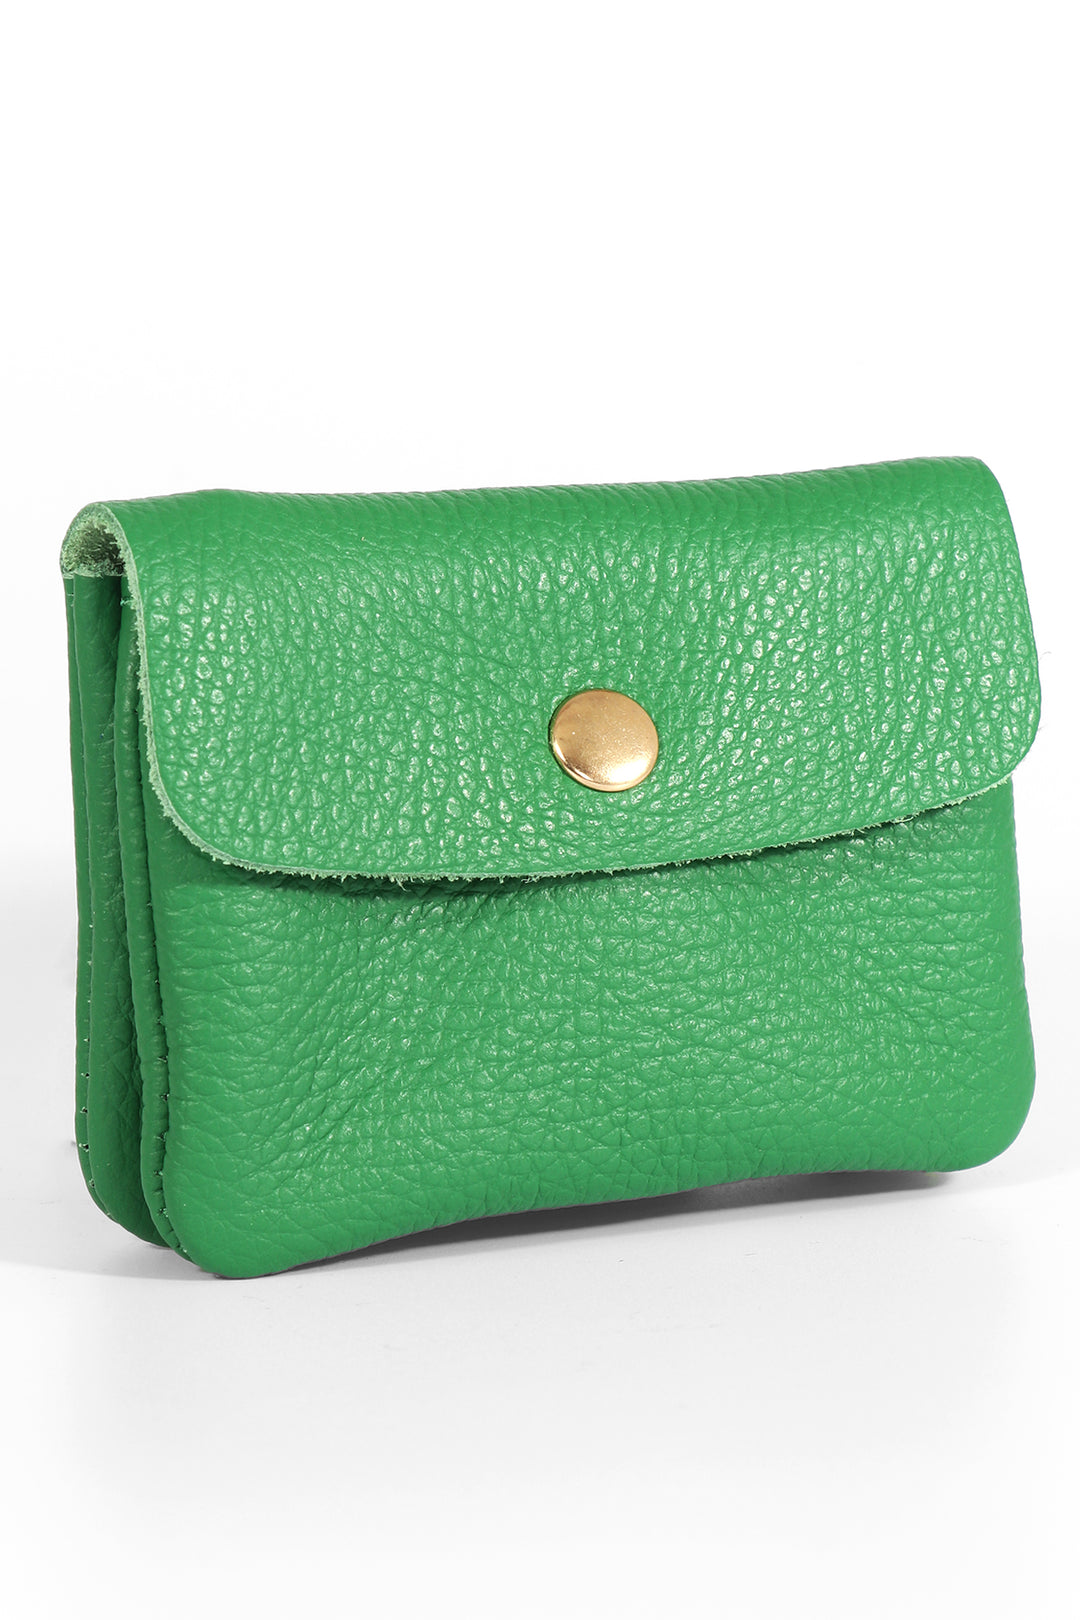 small green leather coin purse with snap closure button on the outside and internal zip pocket